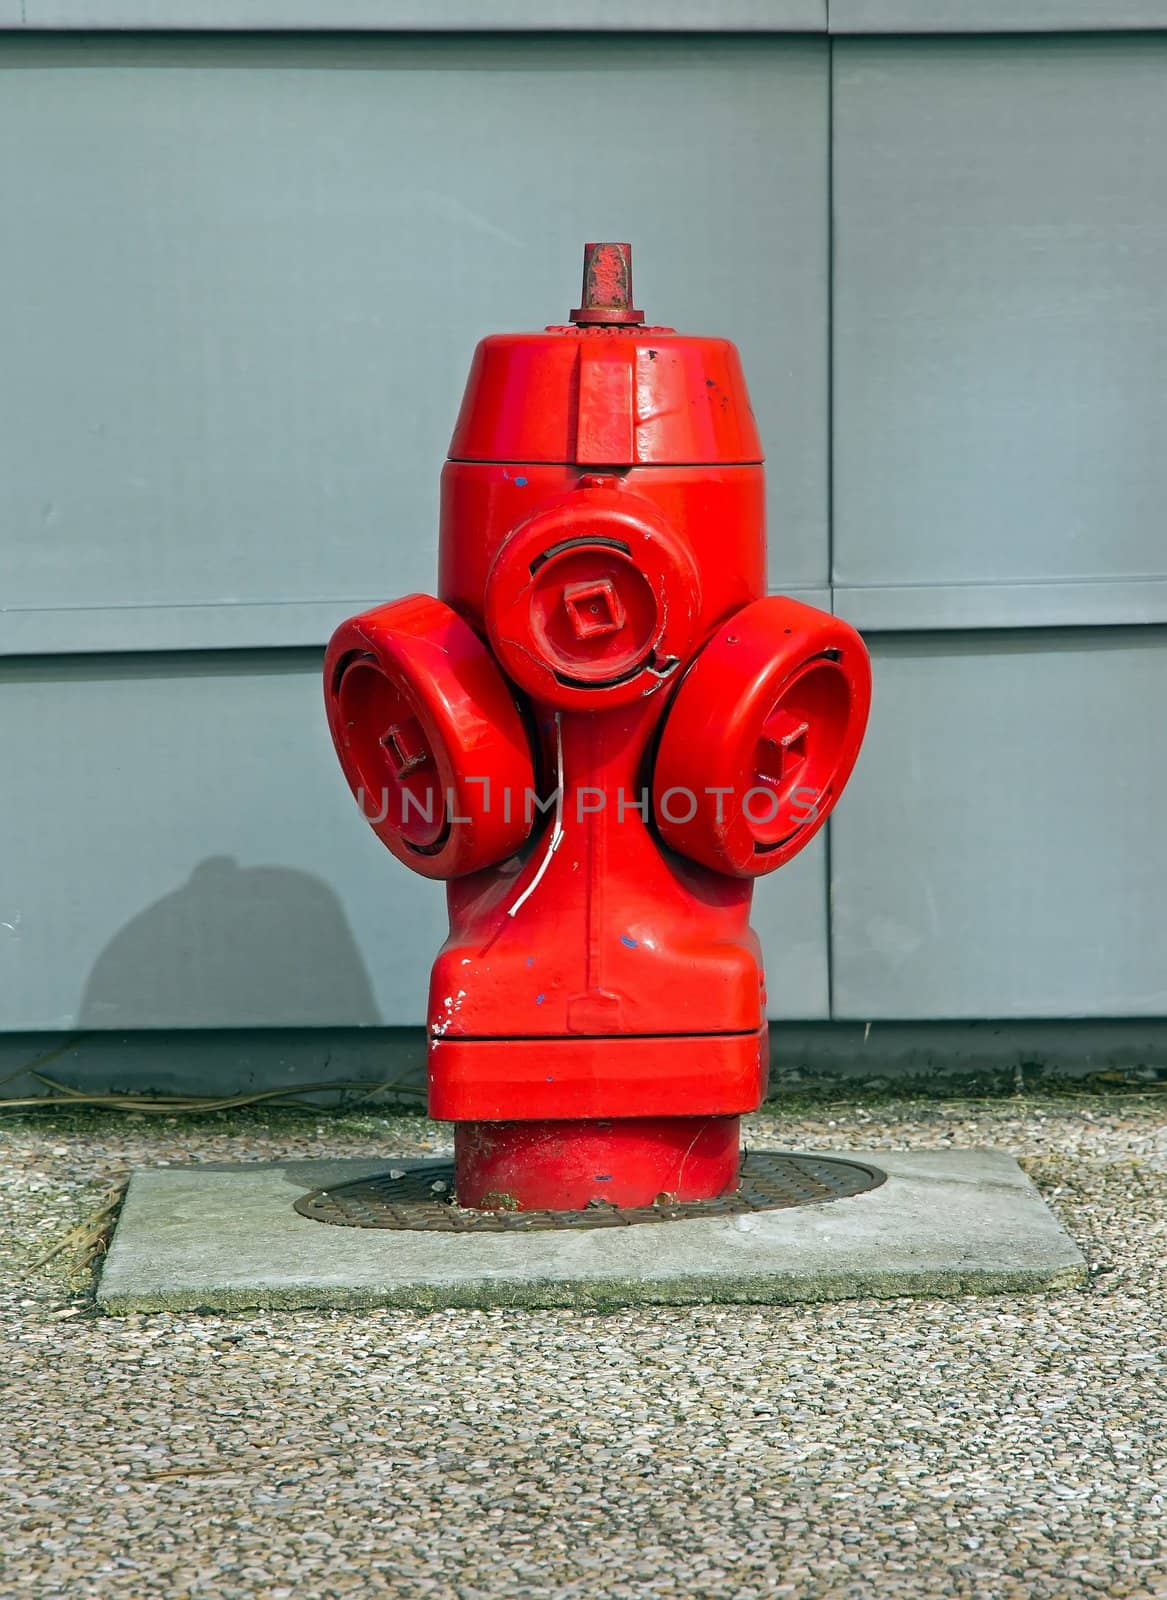 fire hydrant for firefighters  city suburb of Paris France